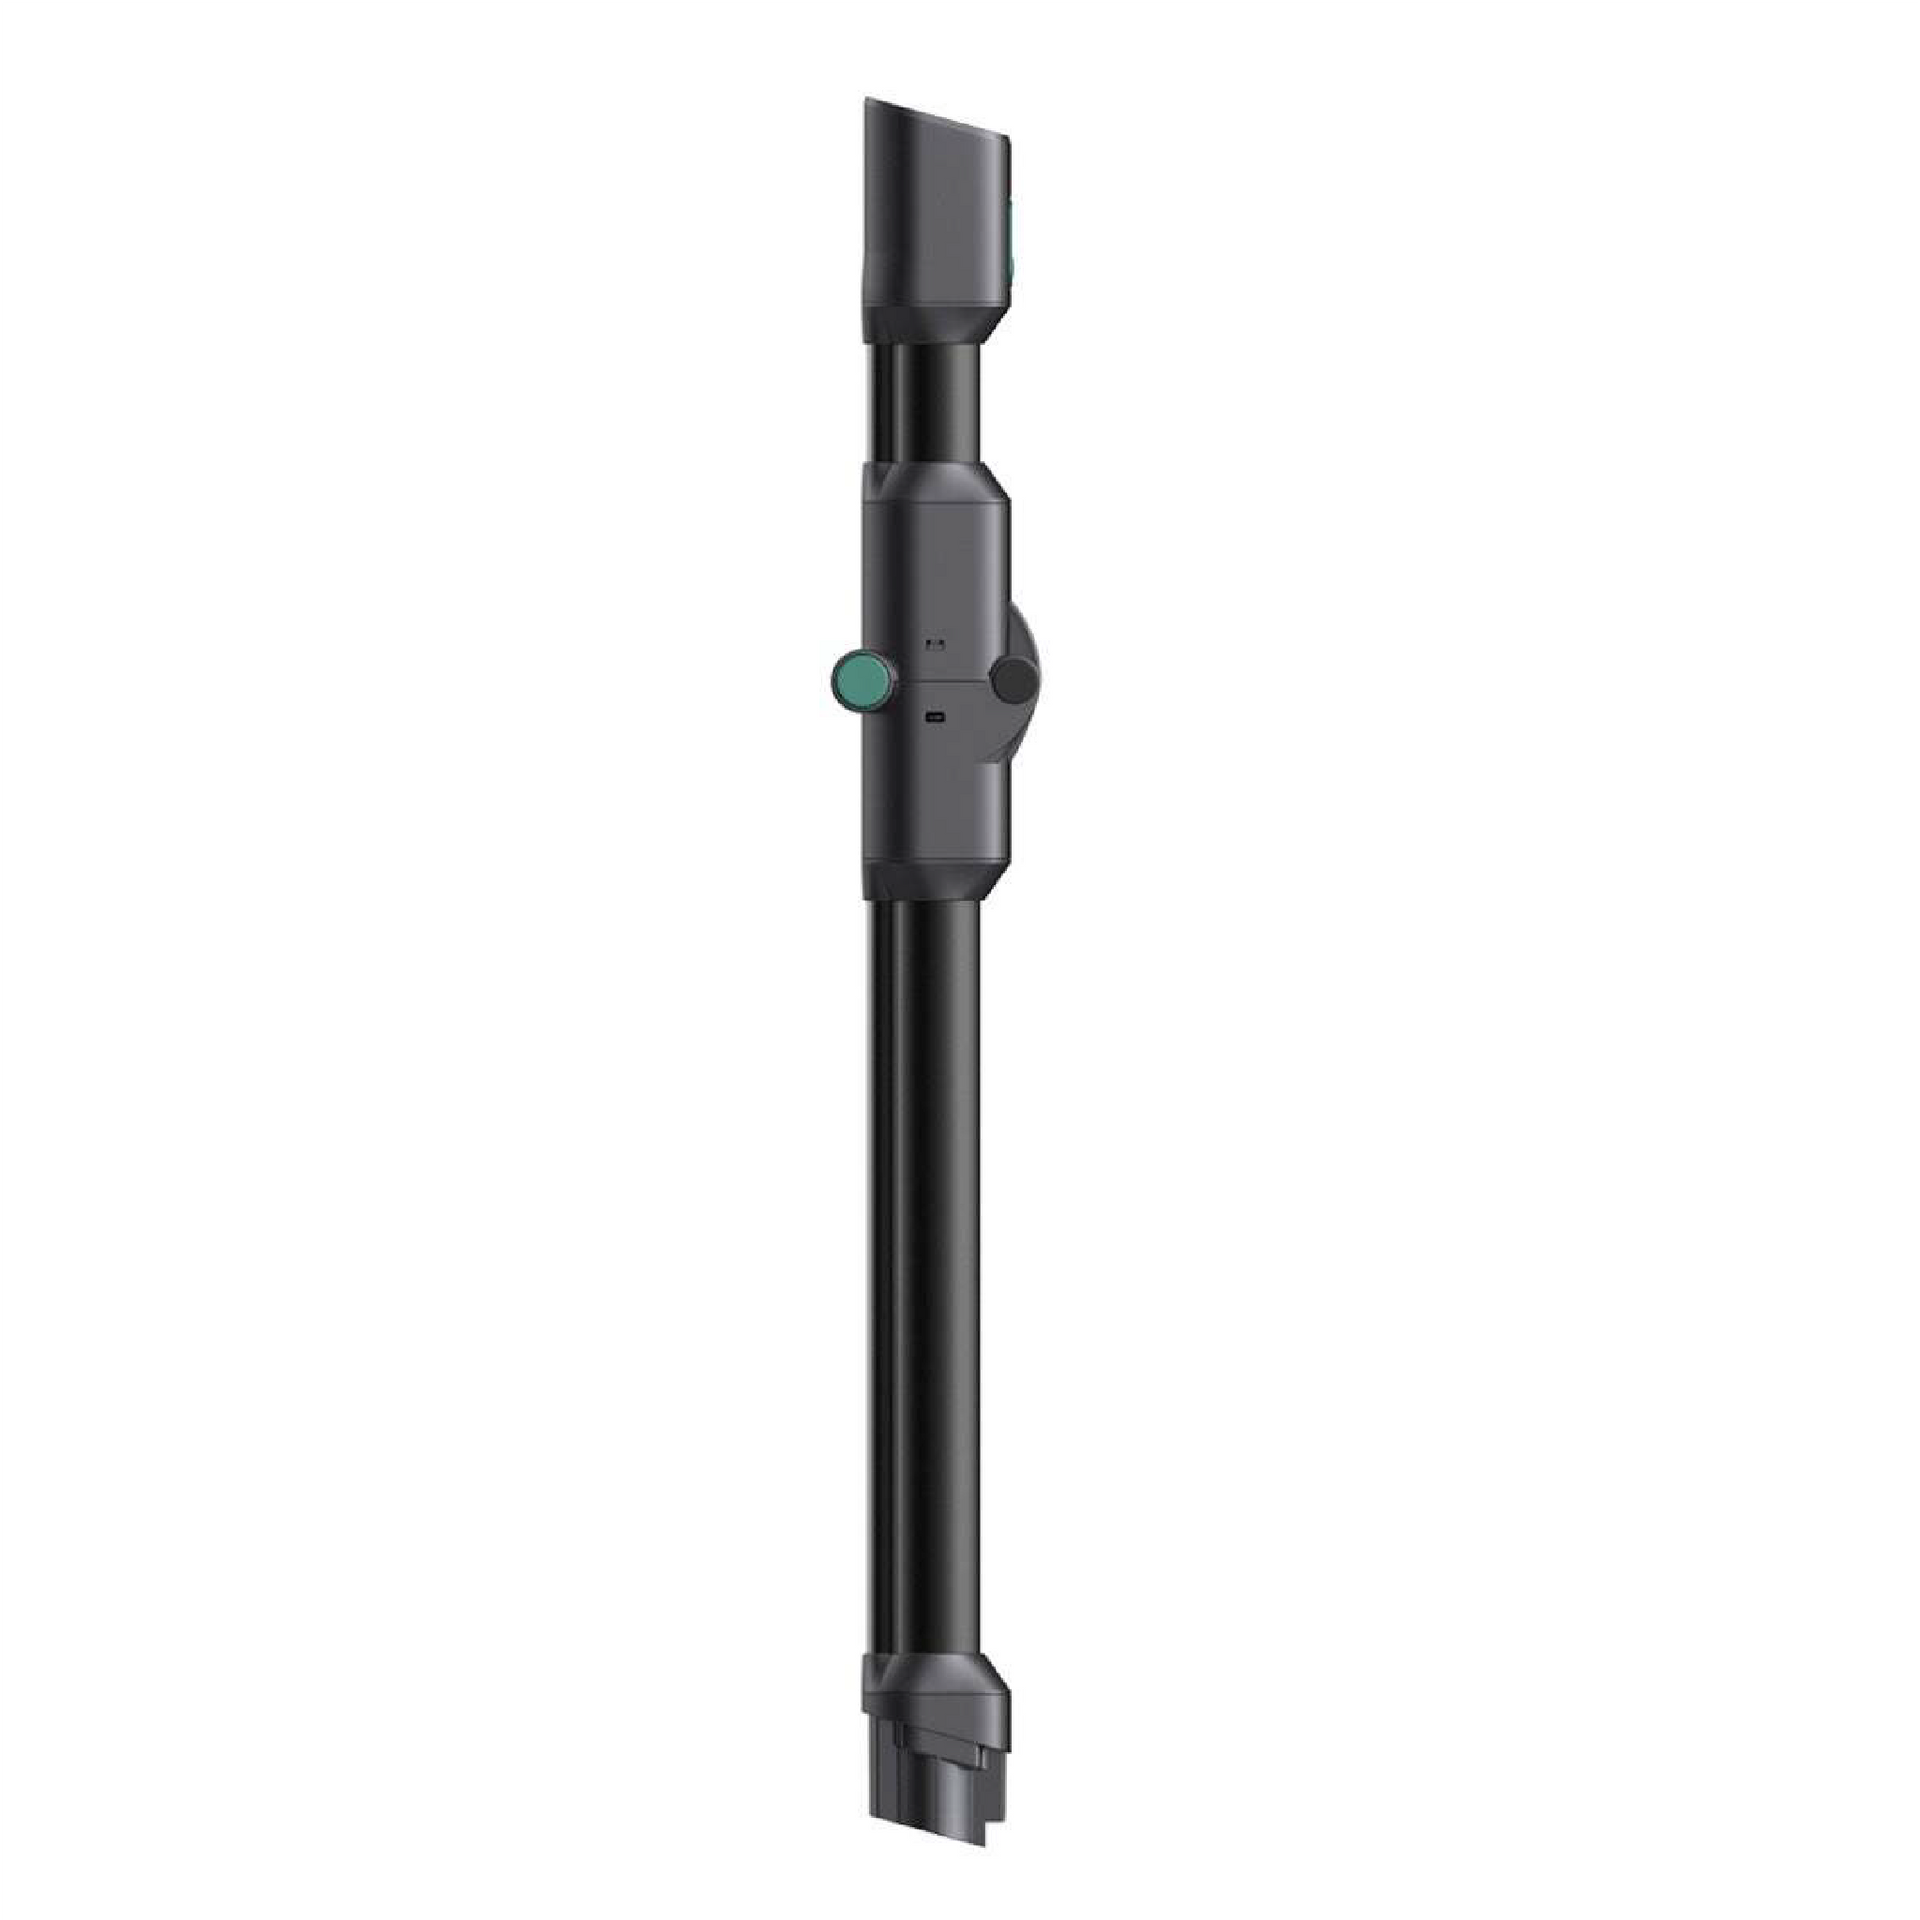 Wyze Cordless Vacuum S  A Stick Vacuum That's Portable and Lightweight –  Wyze Labs, Inc.